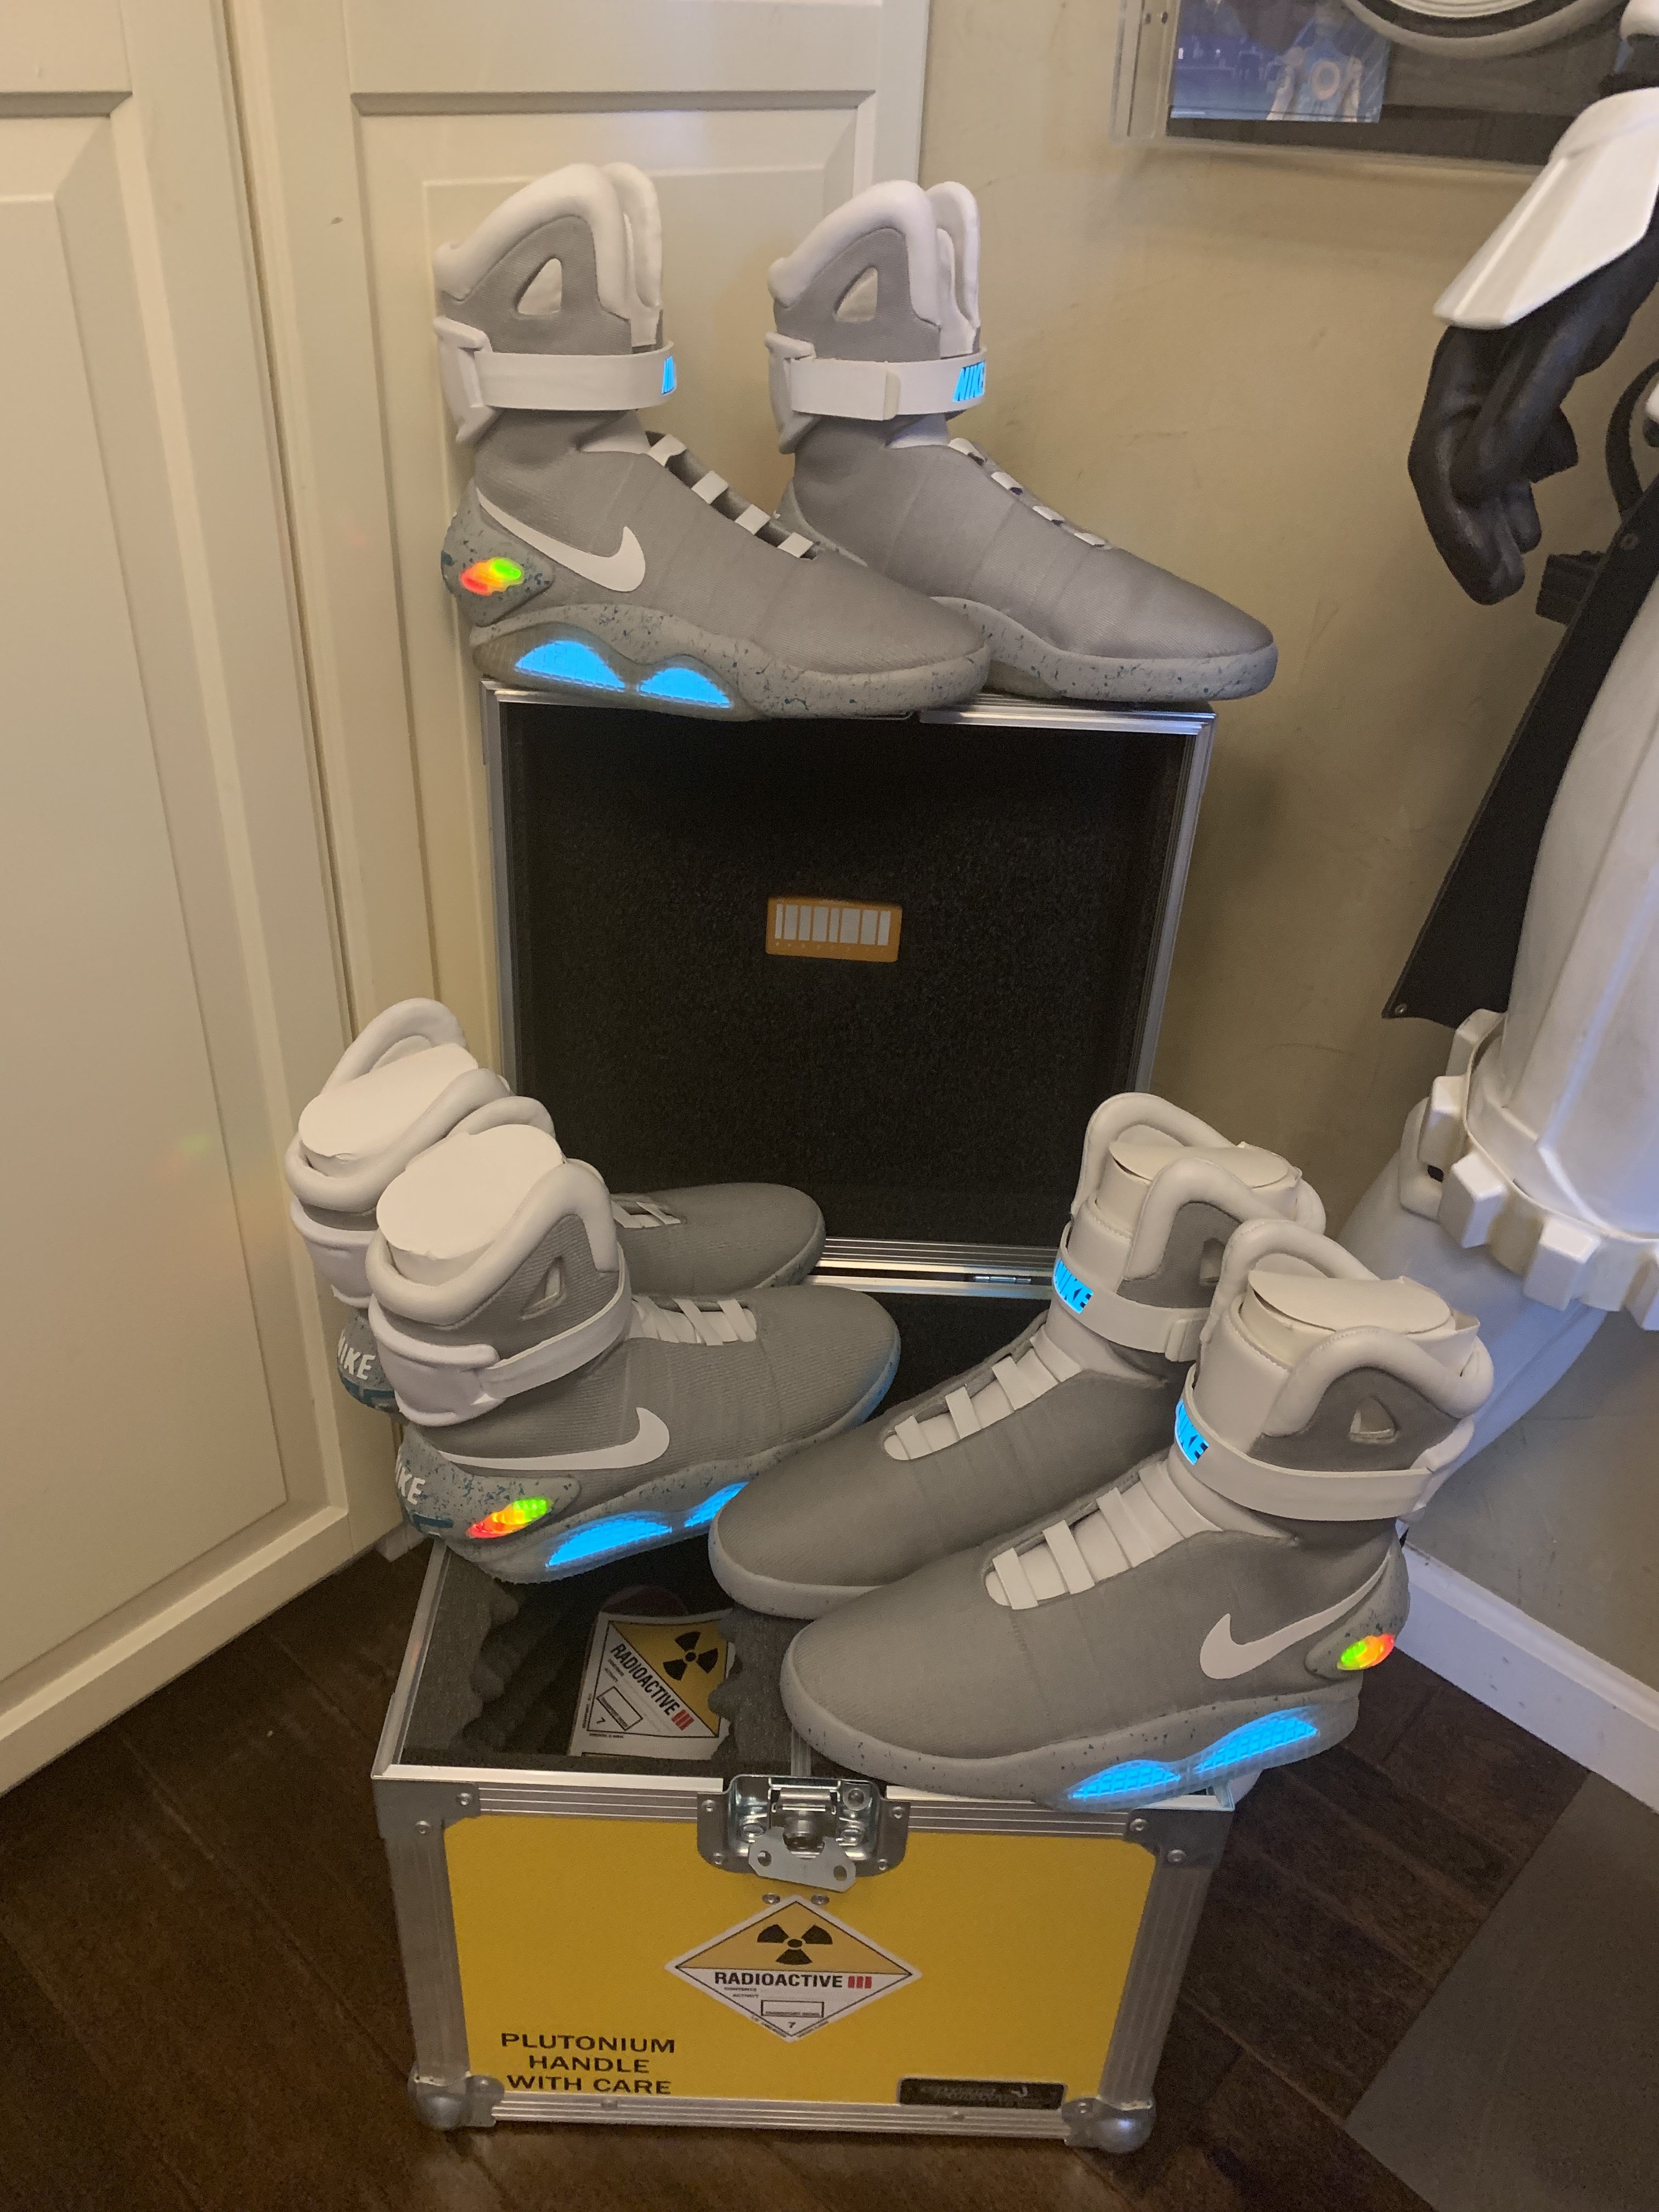 Official V3 Nike MAG Replica Thread - V3 Discussion Thread | Page 190 | RPF  Costume and Prop Maker Community